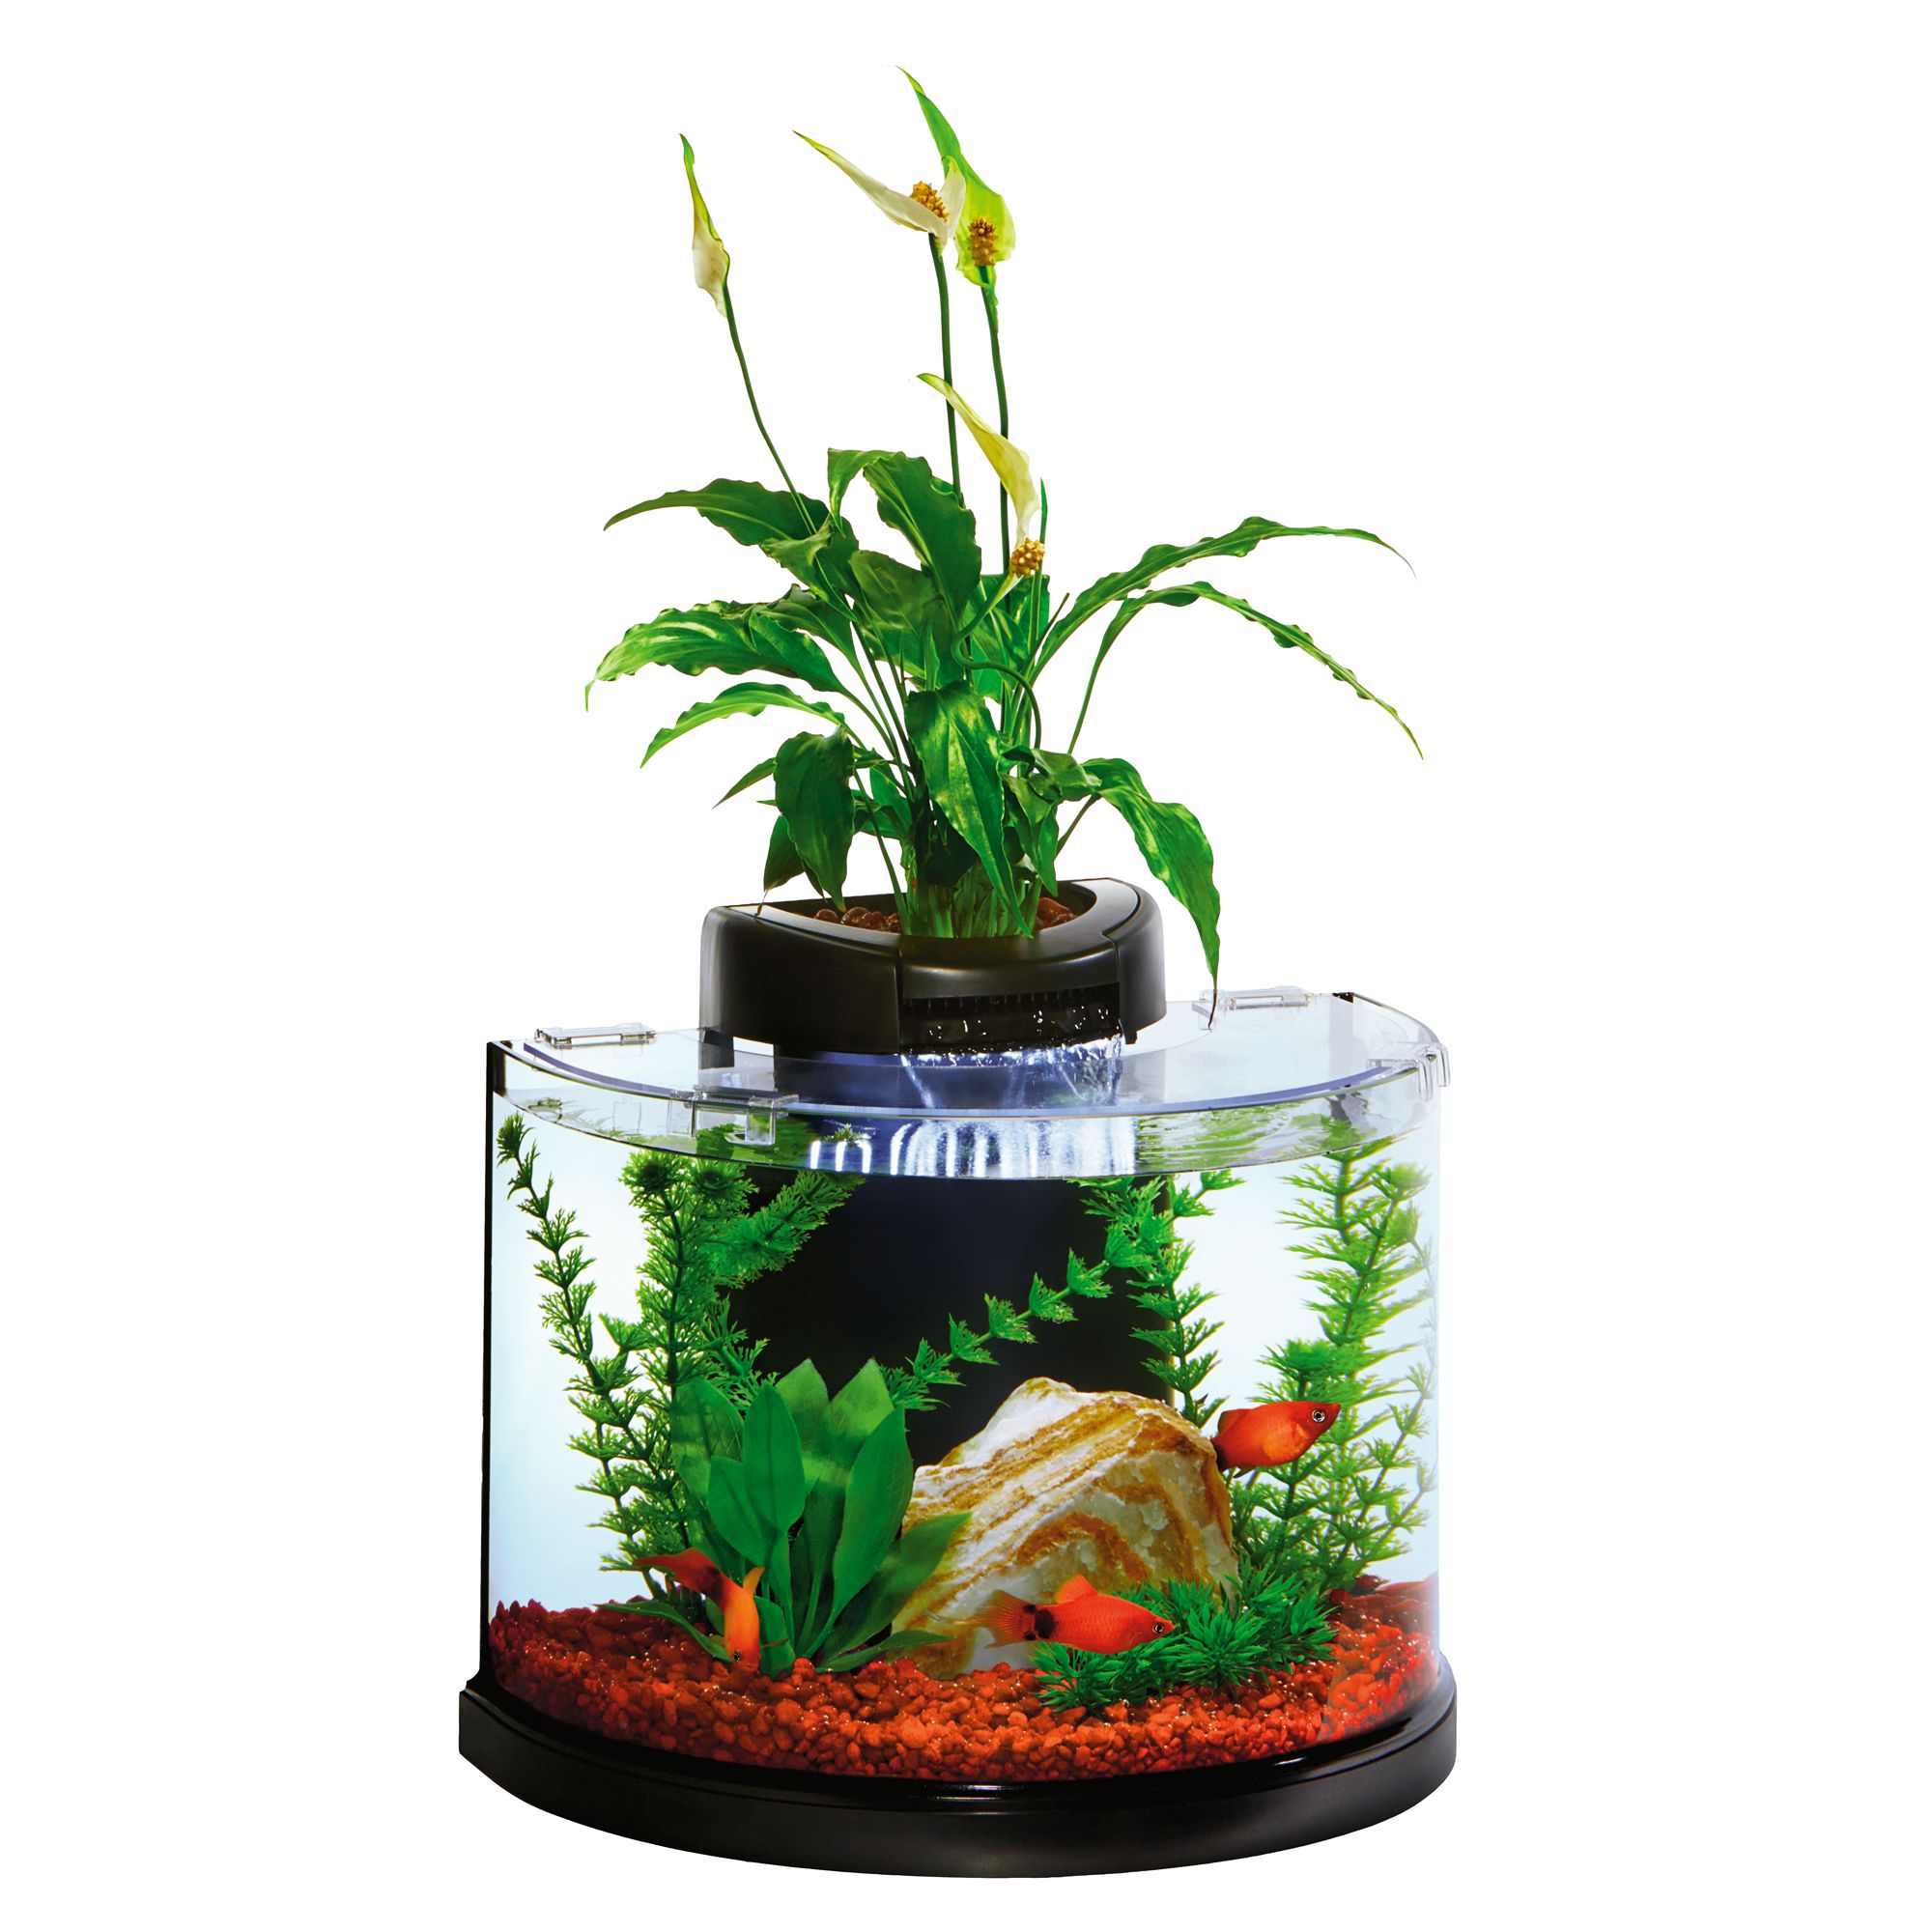 fish supplies: products & accessories for fish  petsmart